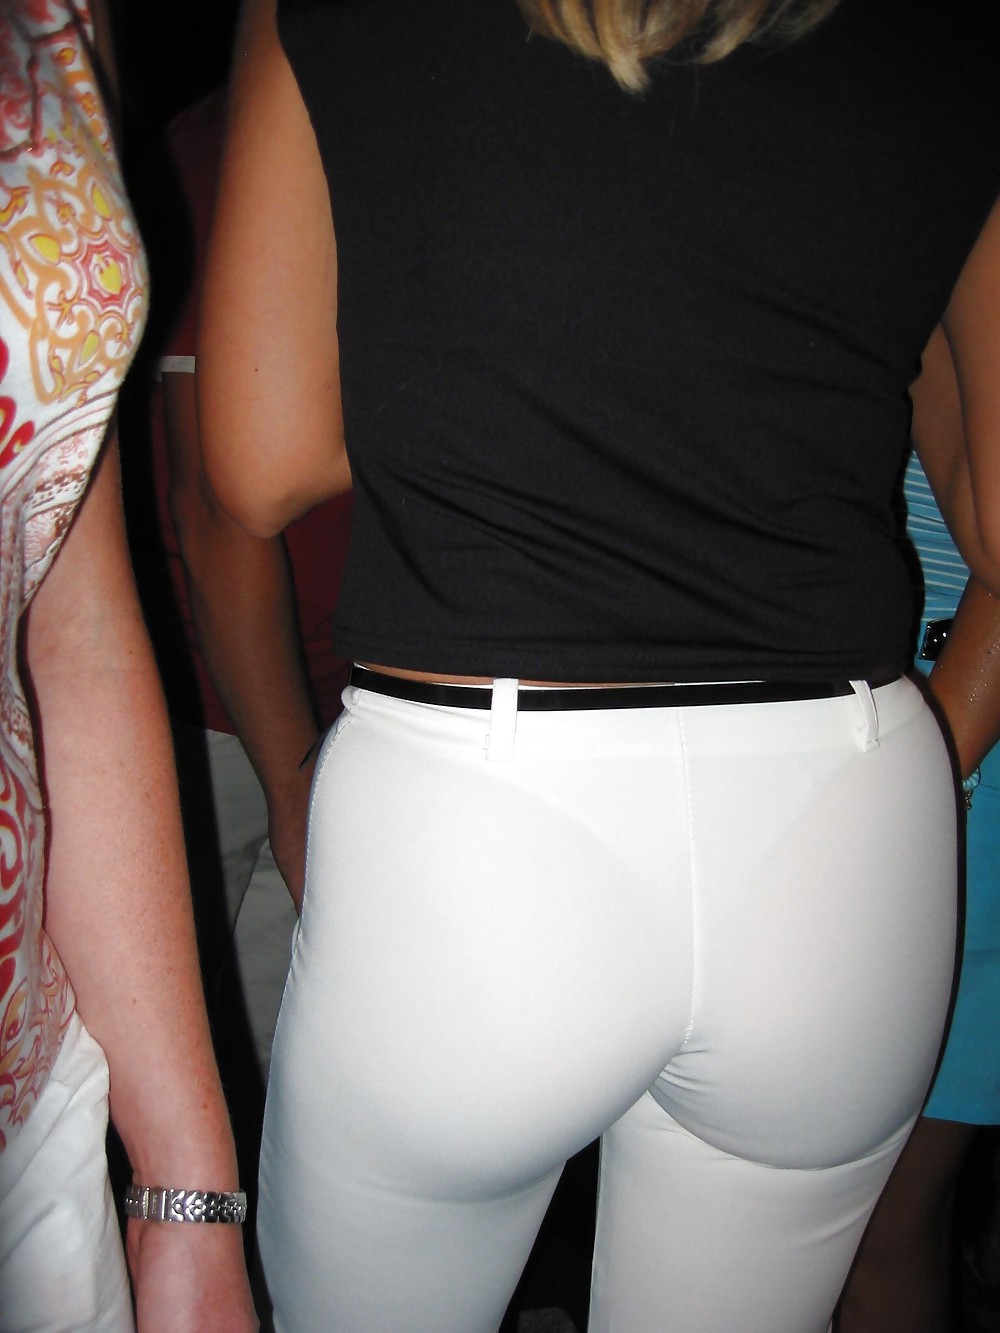 Free Hot Wives In Tight White Pants photos